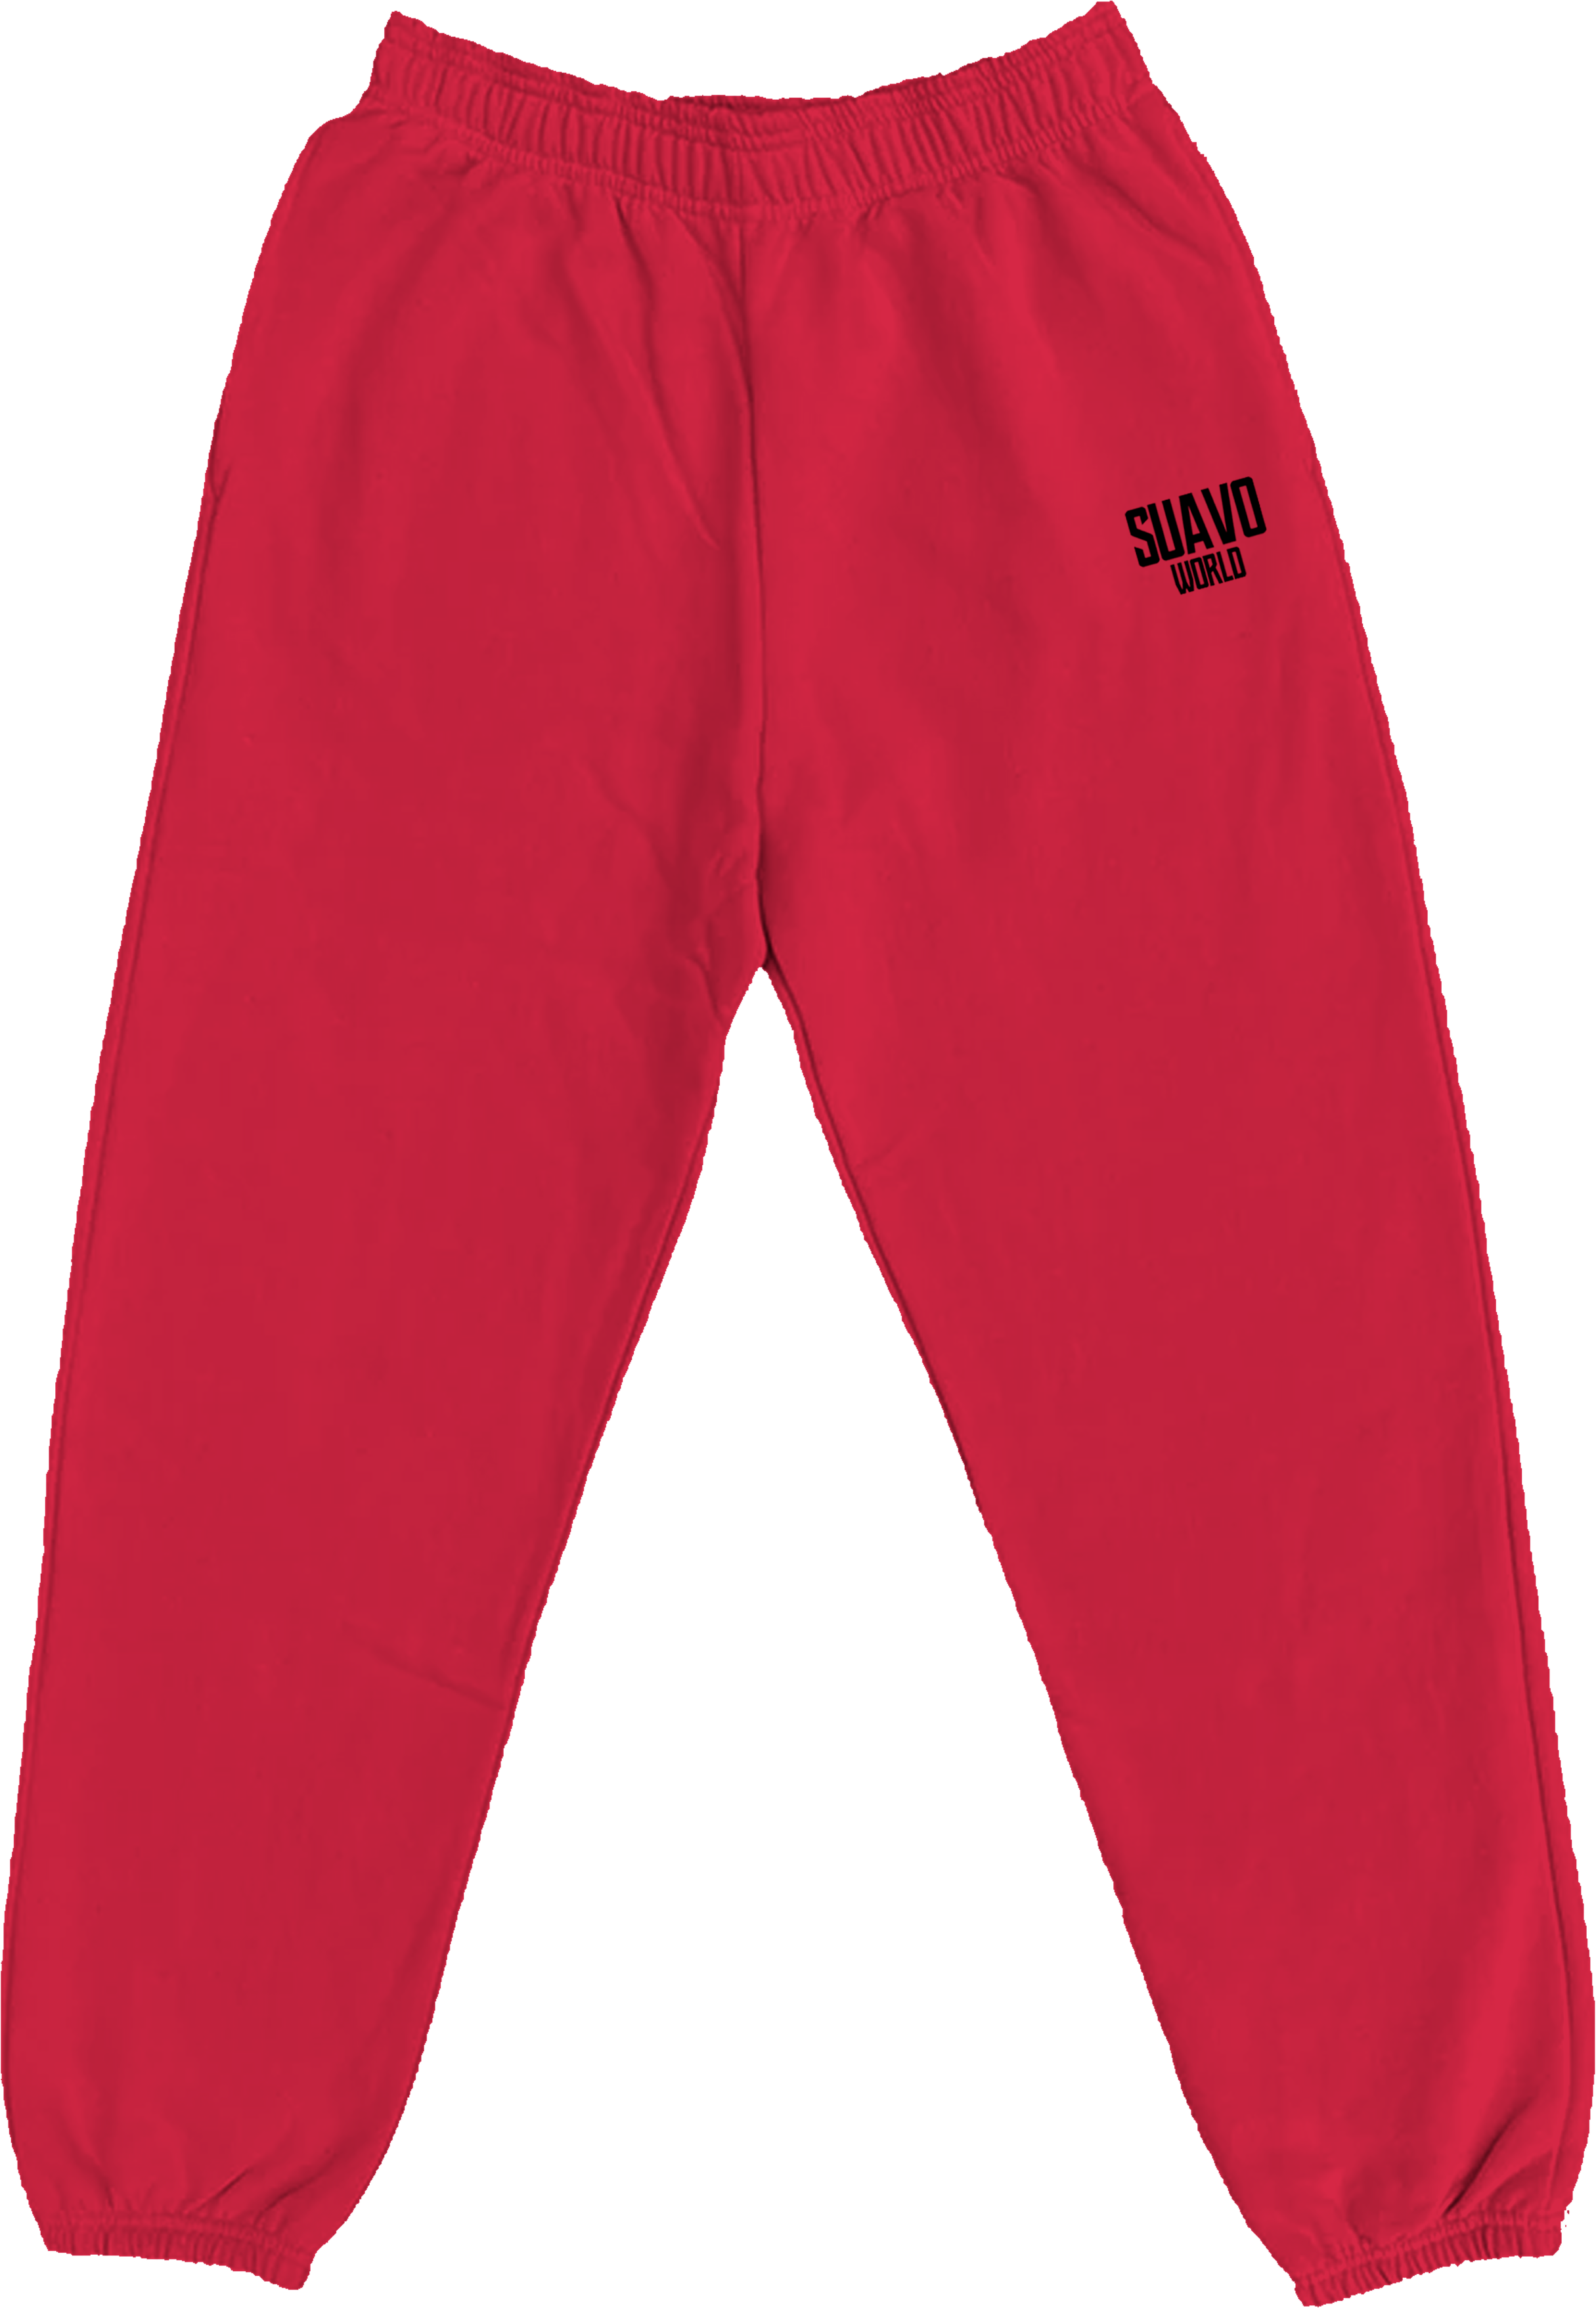 SIGNATURE SWEATPANTS - LIMITED EDITION THUNDER RED